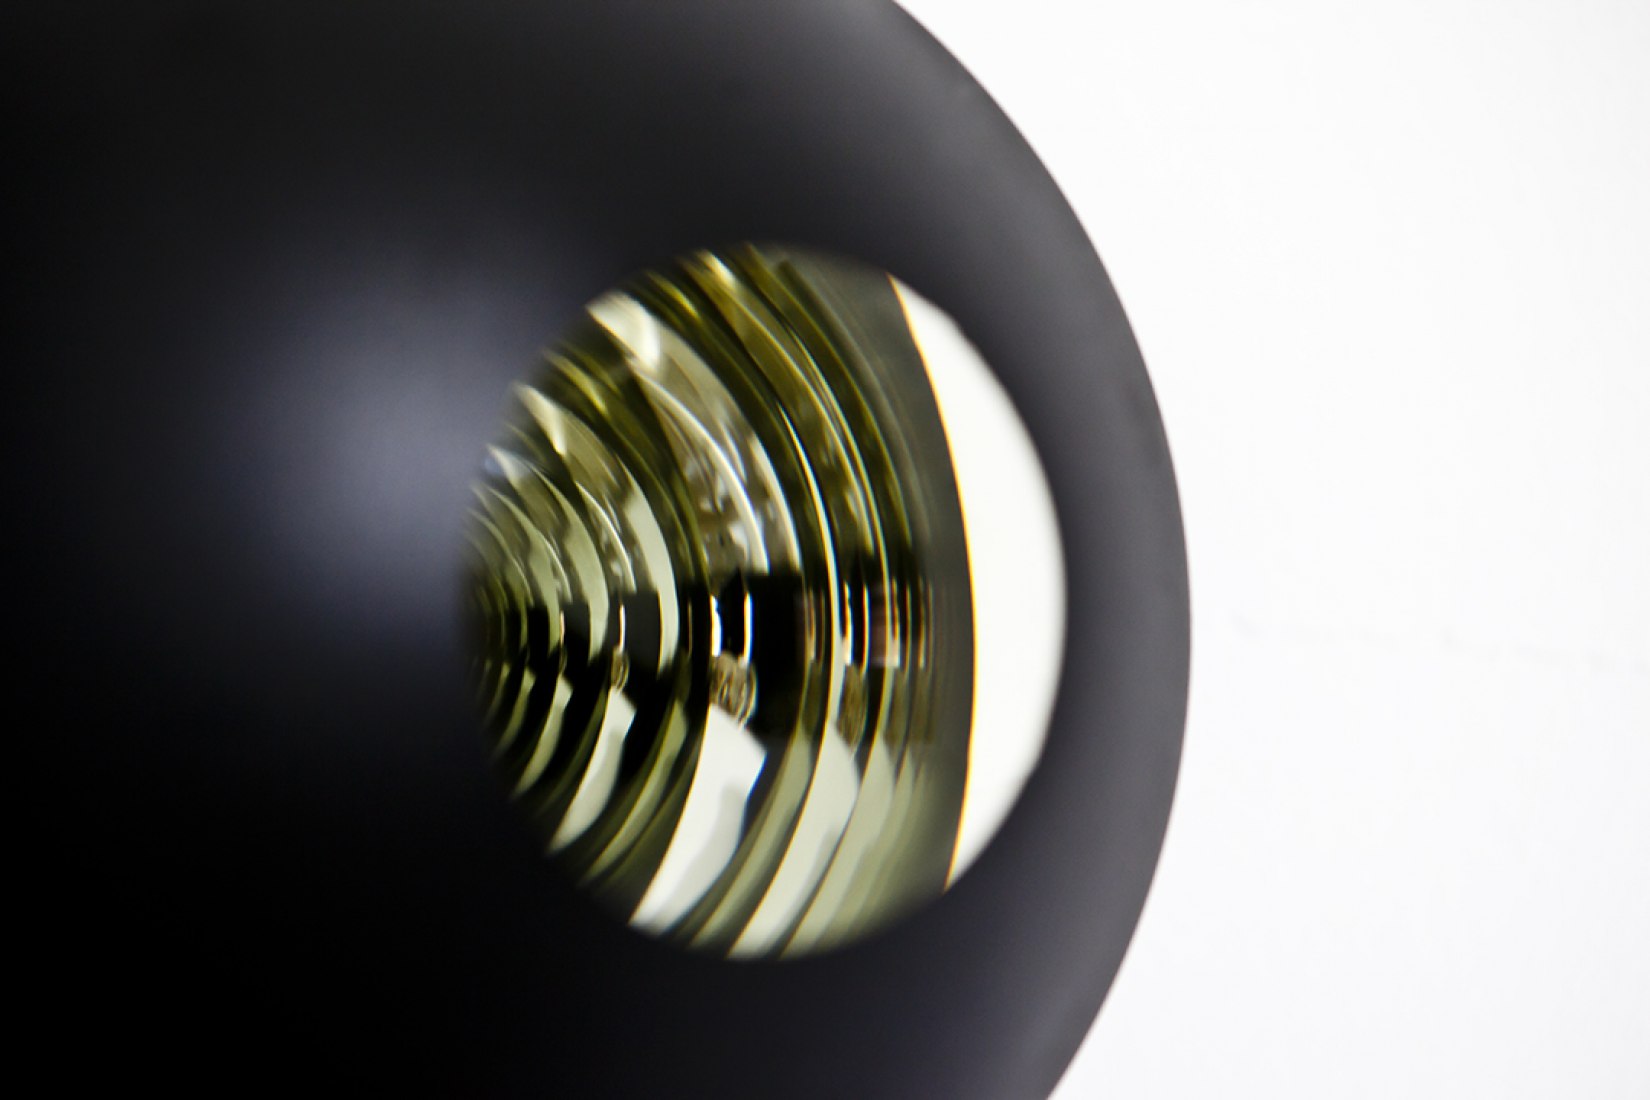 Your successful uncertainty, 2014 (detail from exhibition). 11 glass spheres, ø 20 cm every one. Elvira González Gallery.